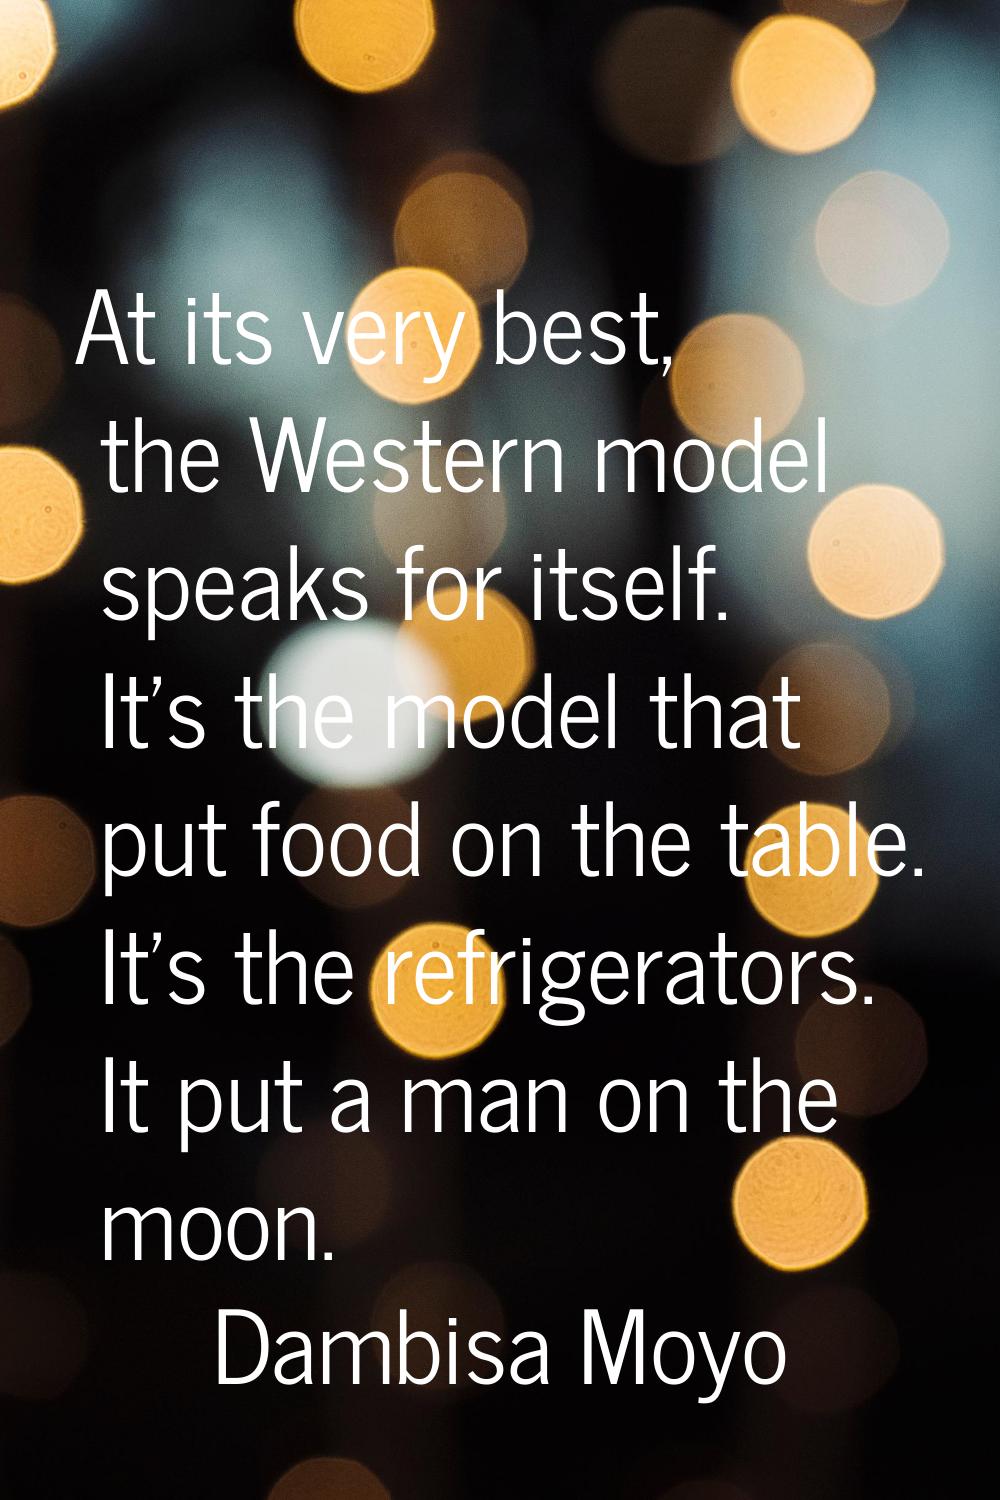 At its very best, the Western model speaks for itself. It's the model that put food on the table. I